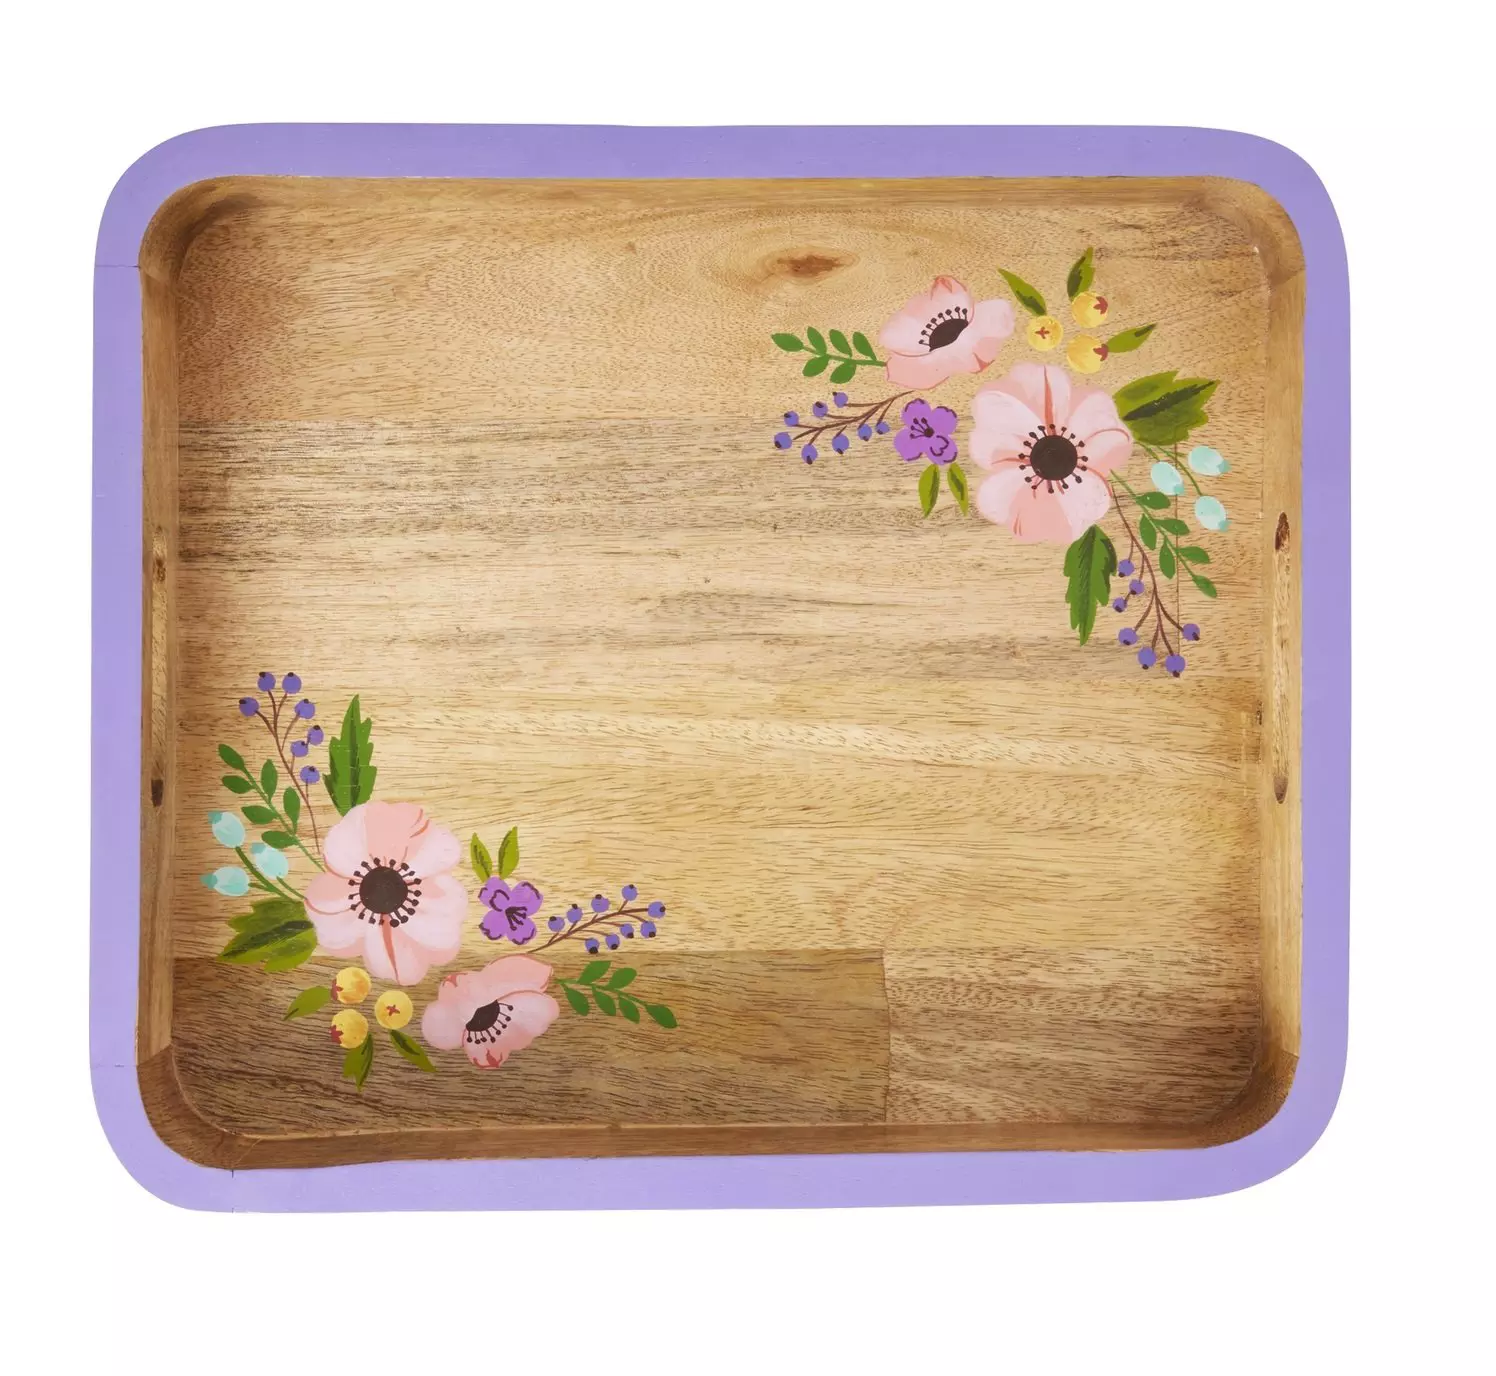 Rice Rectangular Wooden Tray With Handpainted